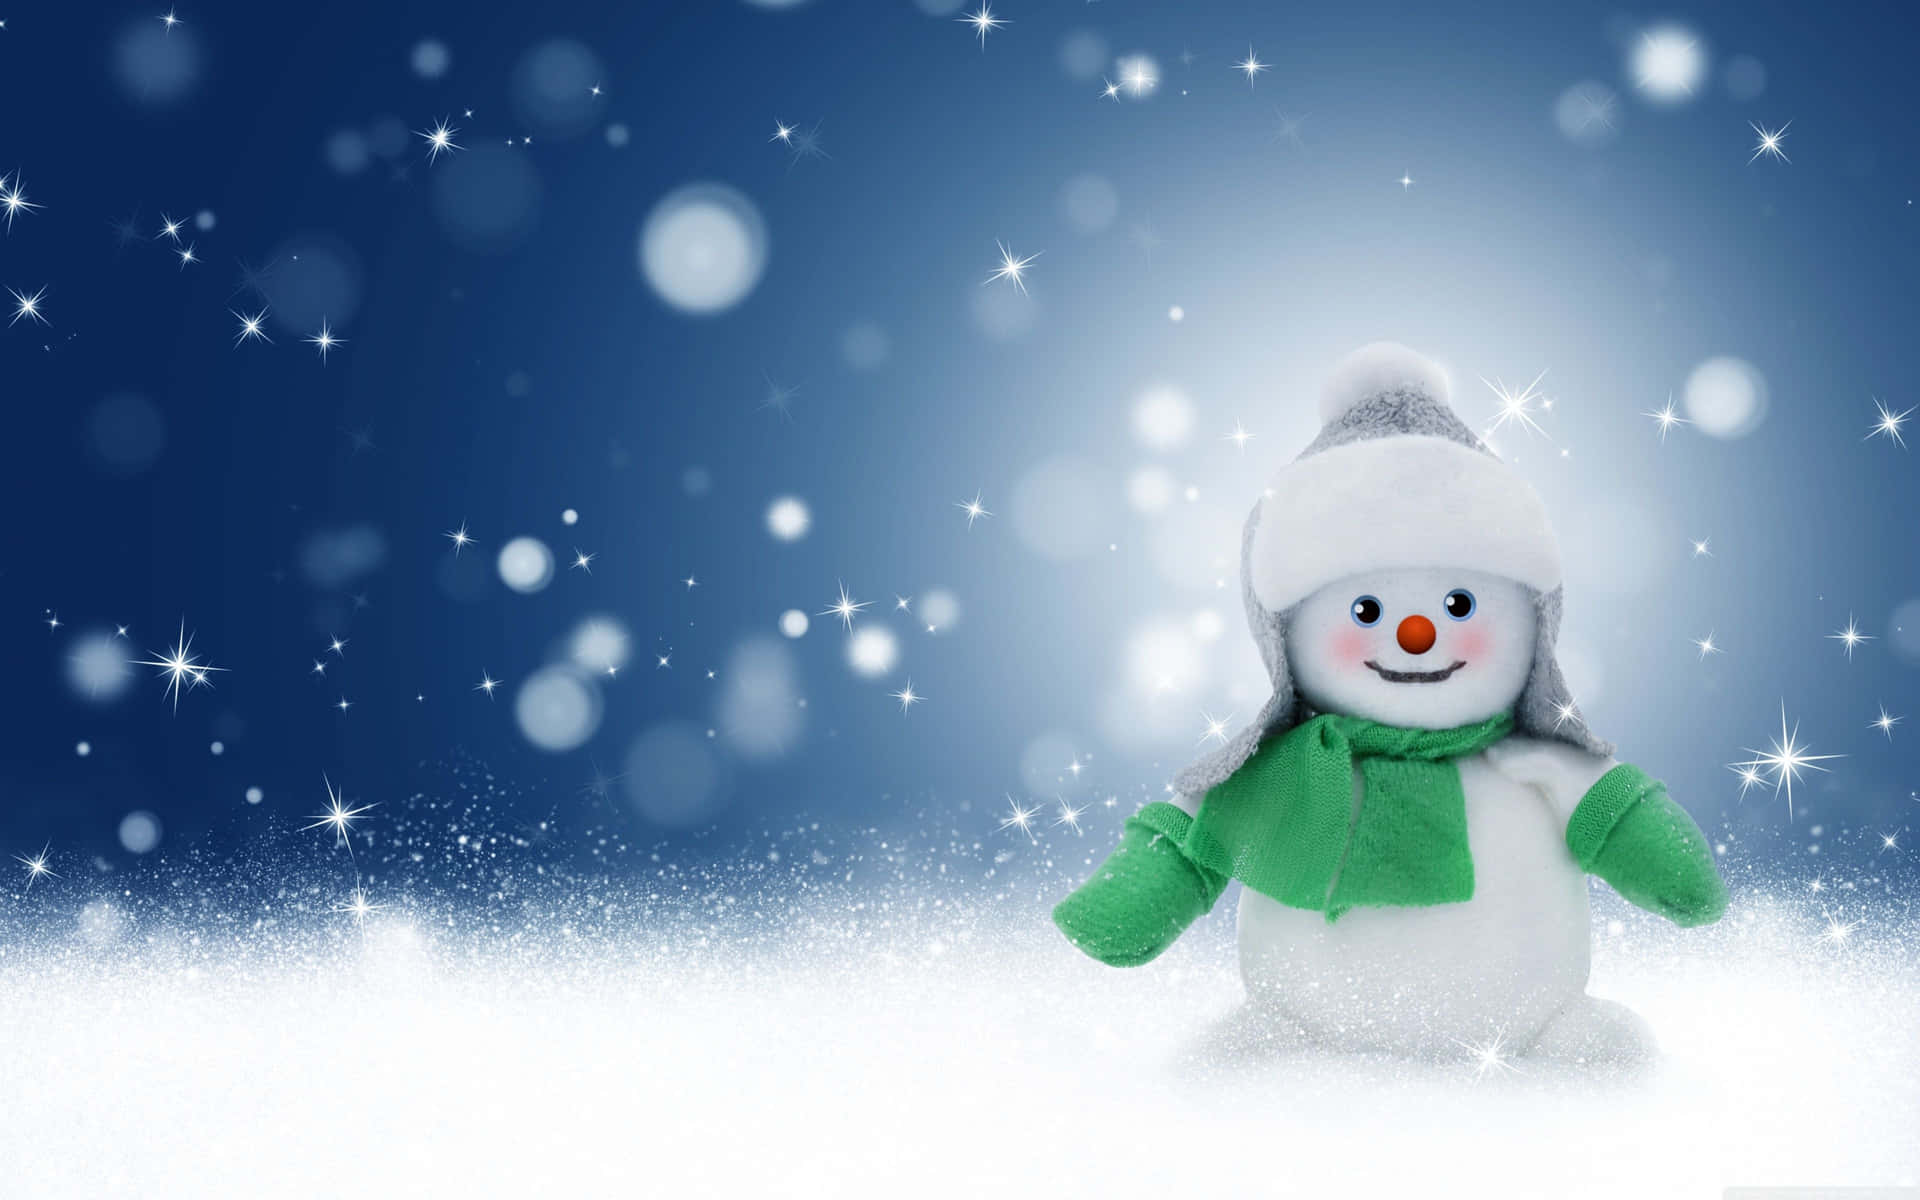 Download Snowman Pictures | Wallpapers.com